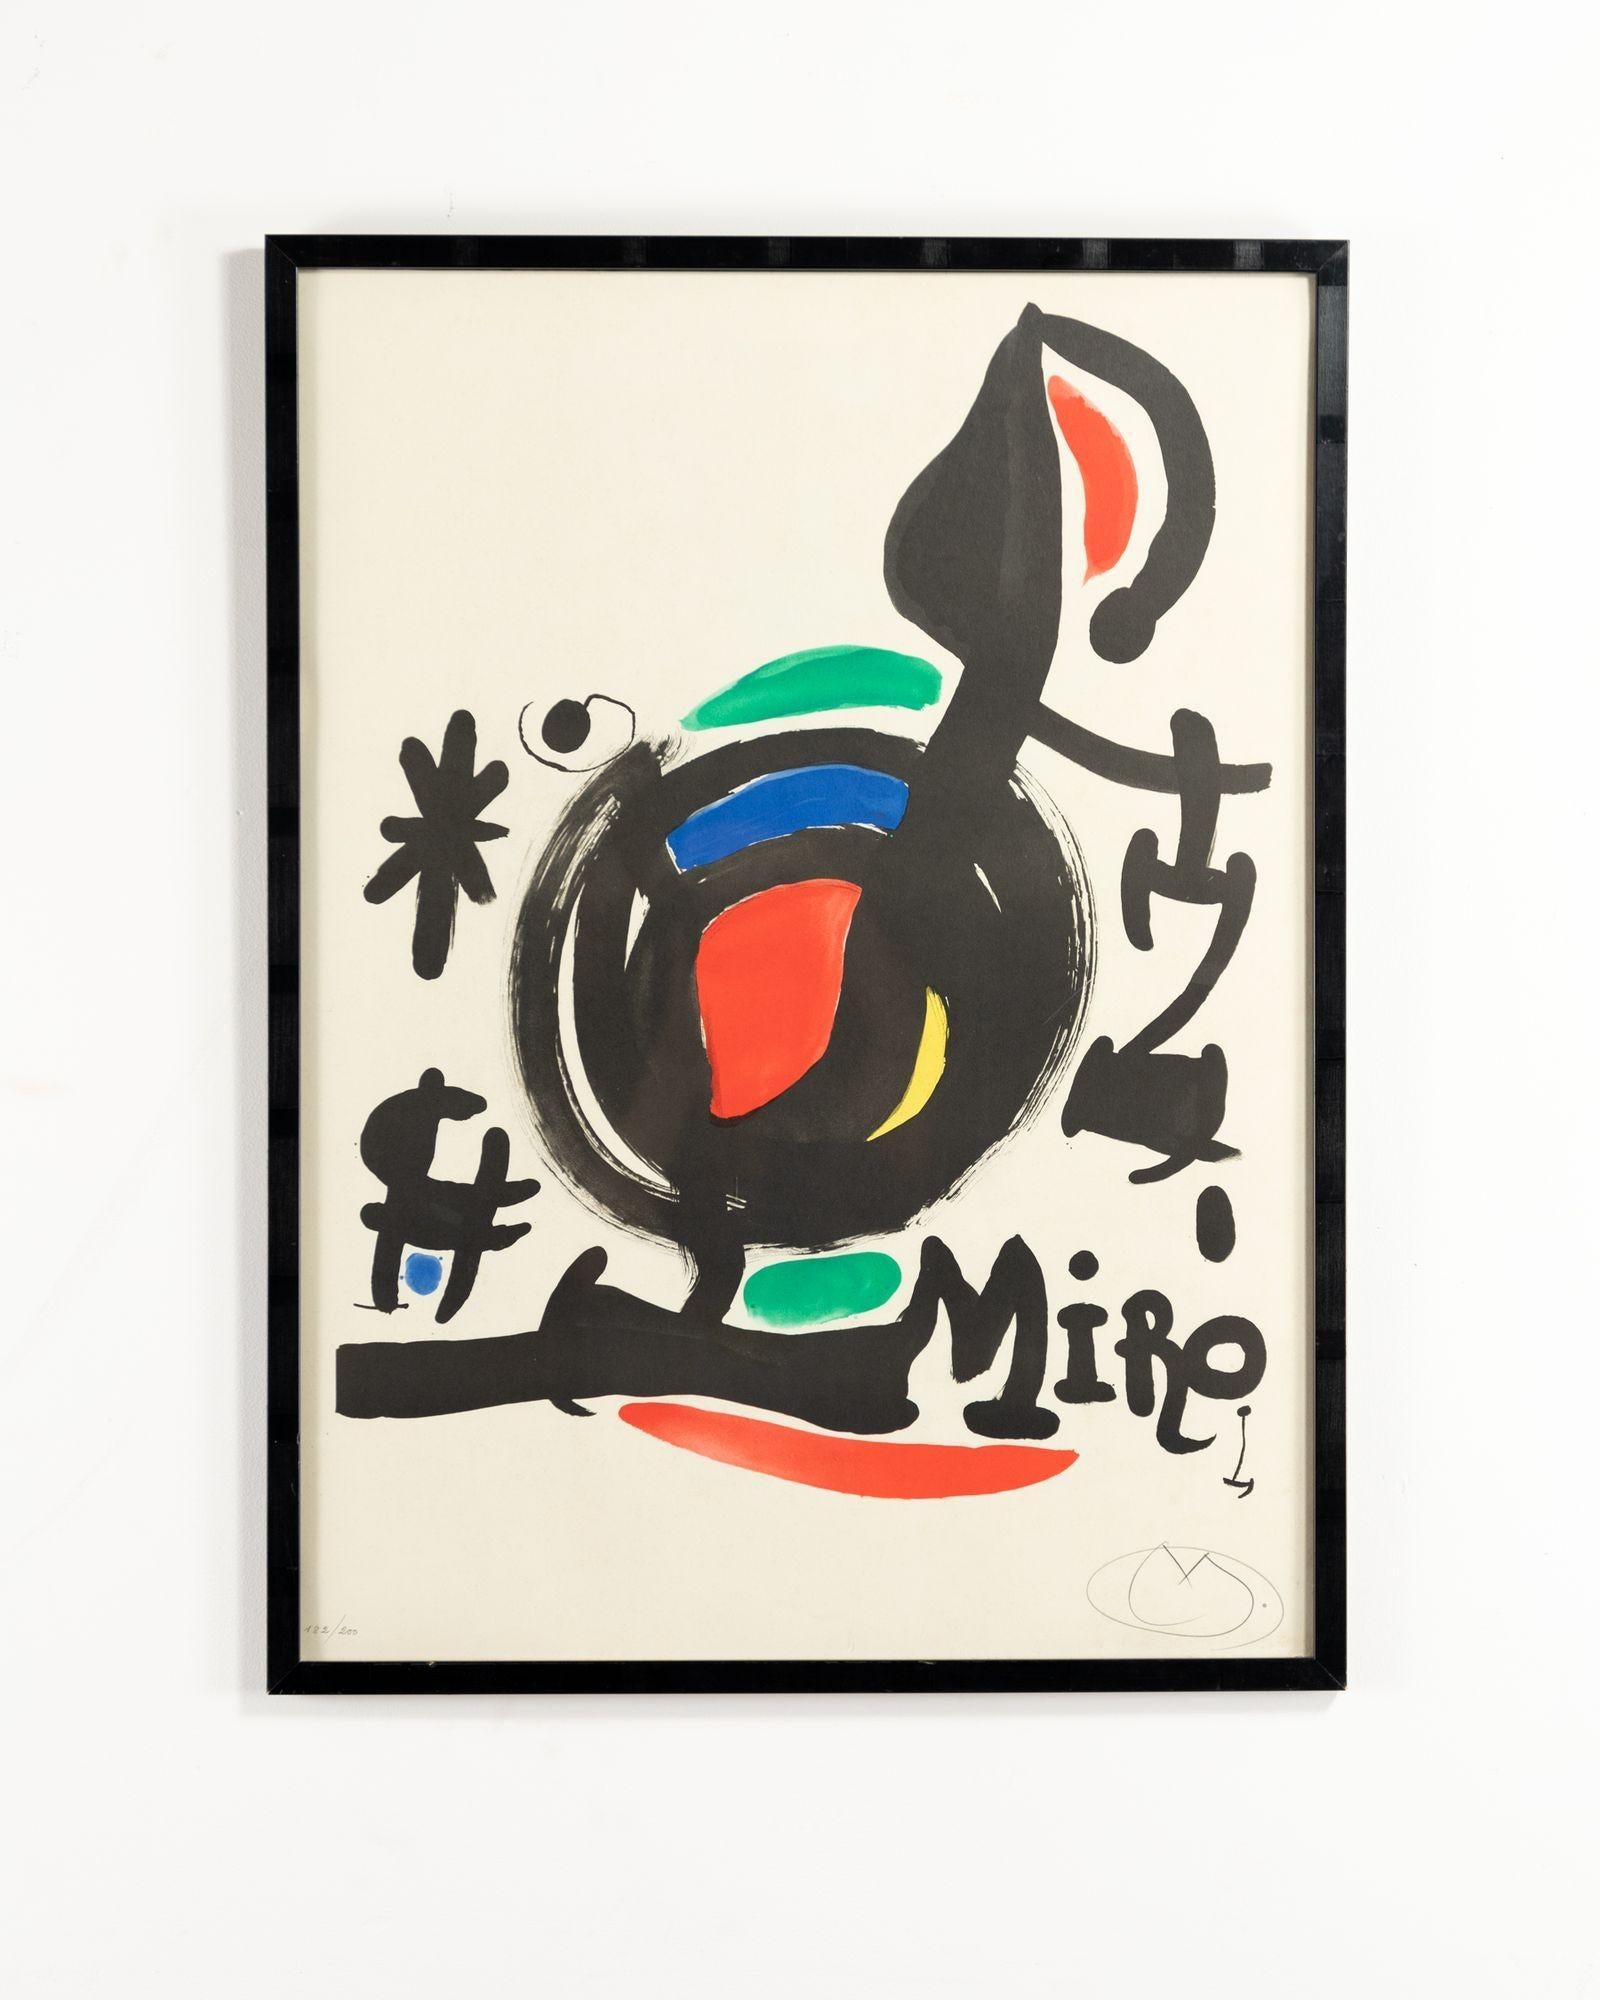 Limited edition lithograph no.182 of 200 titled ITALIA 1969 by Joan Miro pencil signed on the paper with his anagram. Printed in Barcelona Spain in 1970 and sold through Gallery AL MILIONE. This is a beautiful collector-grade surrealist artwork and